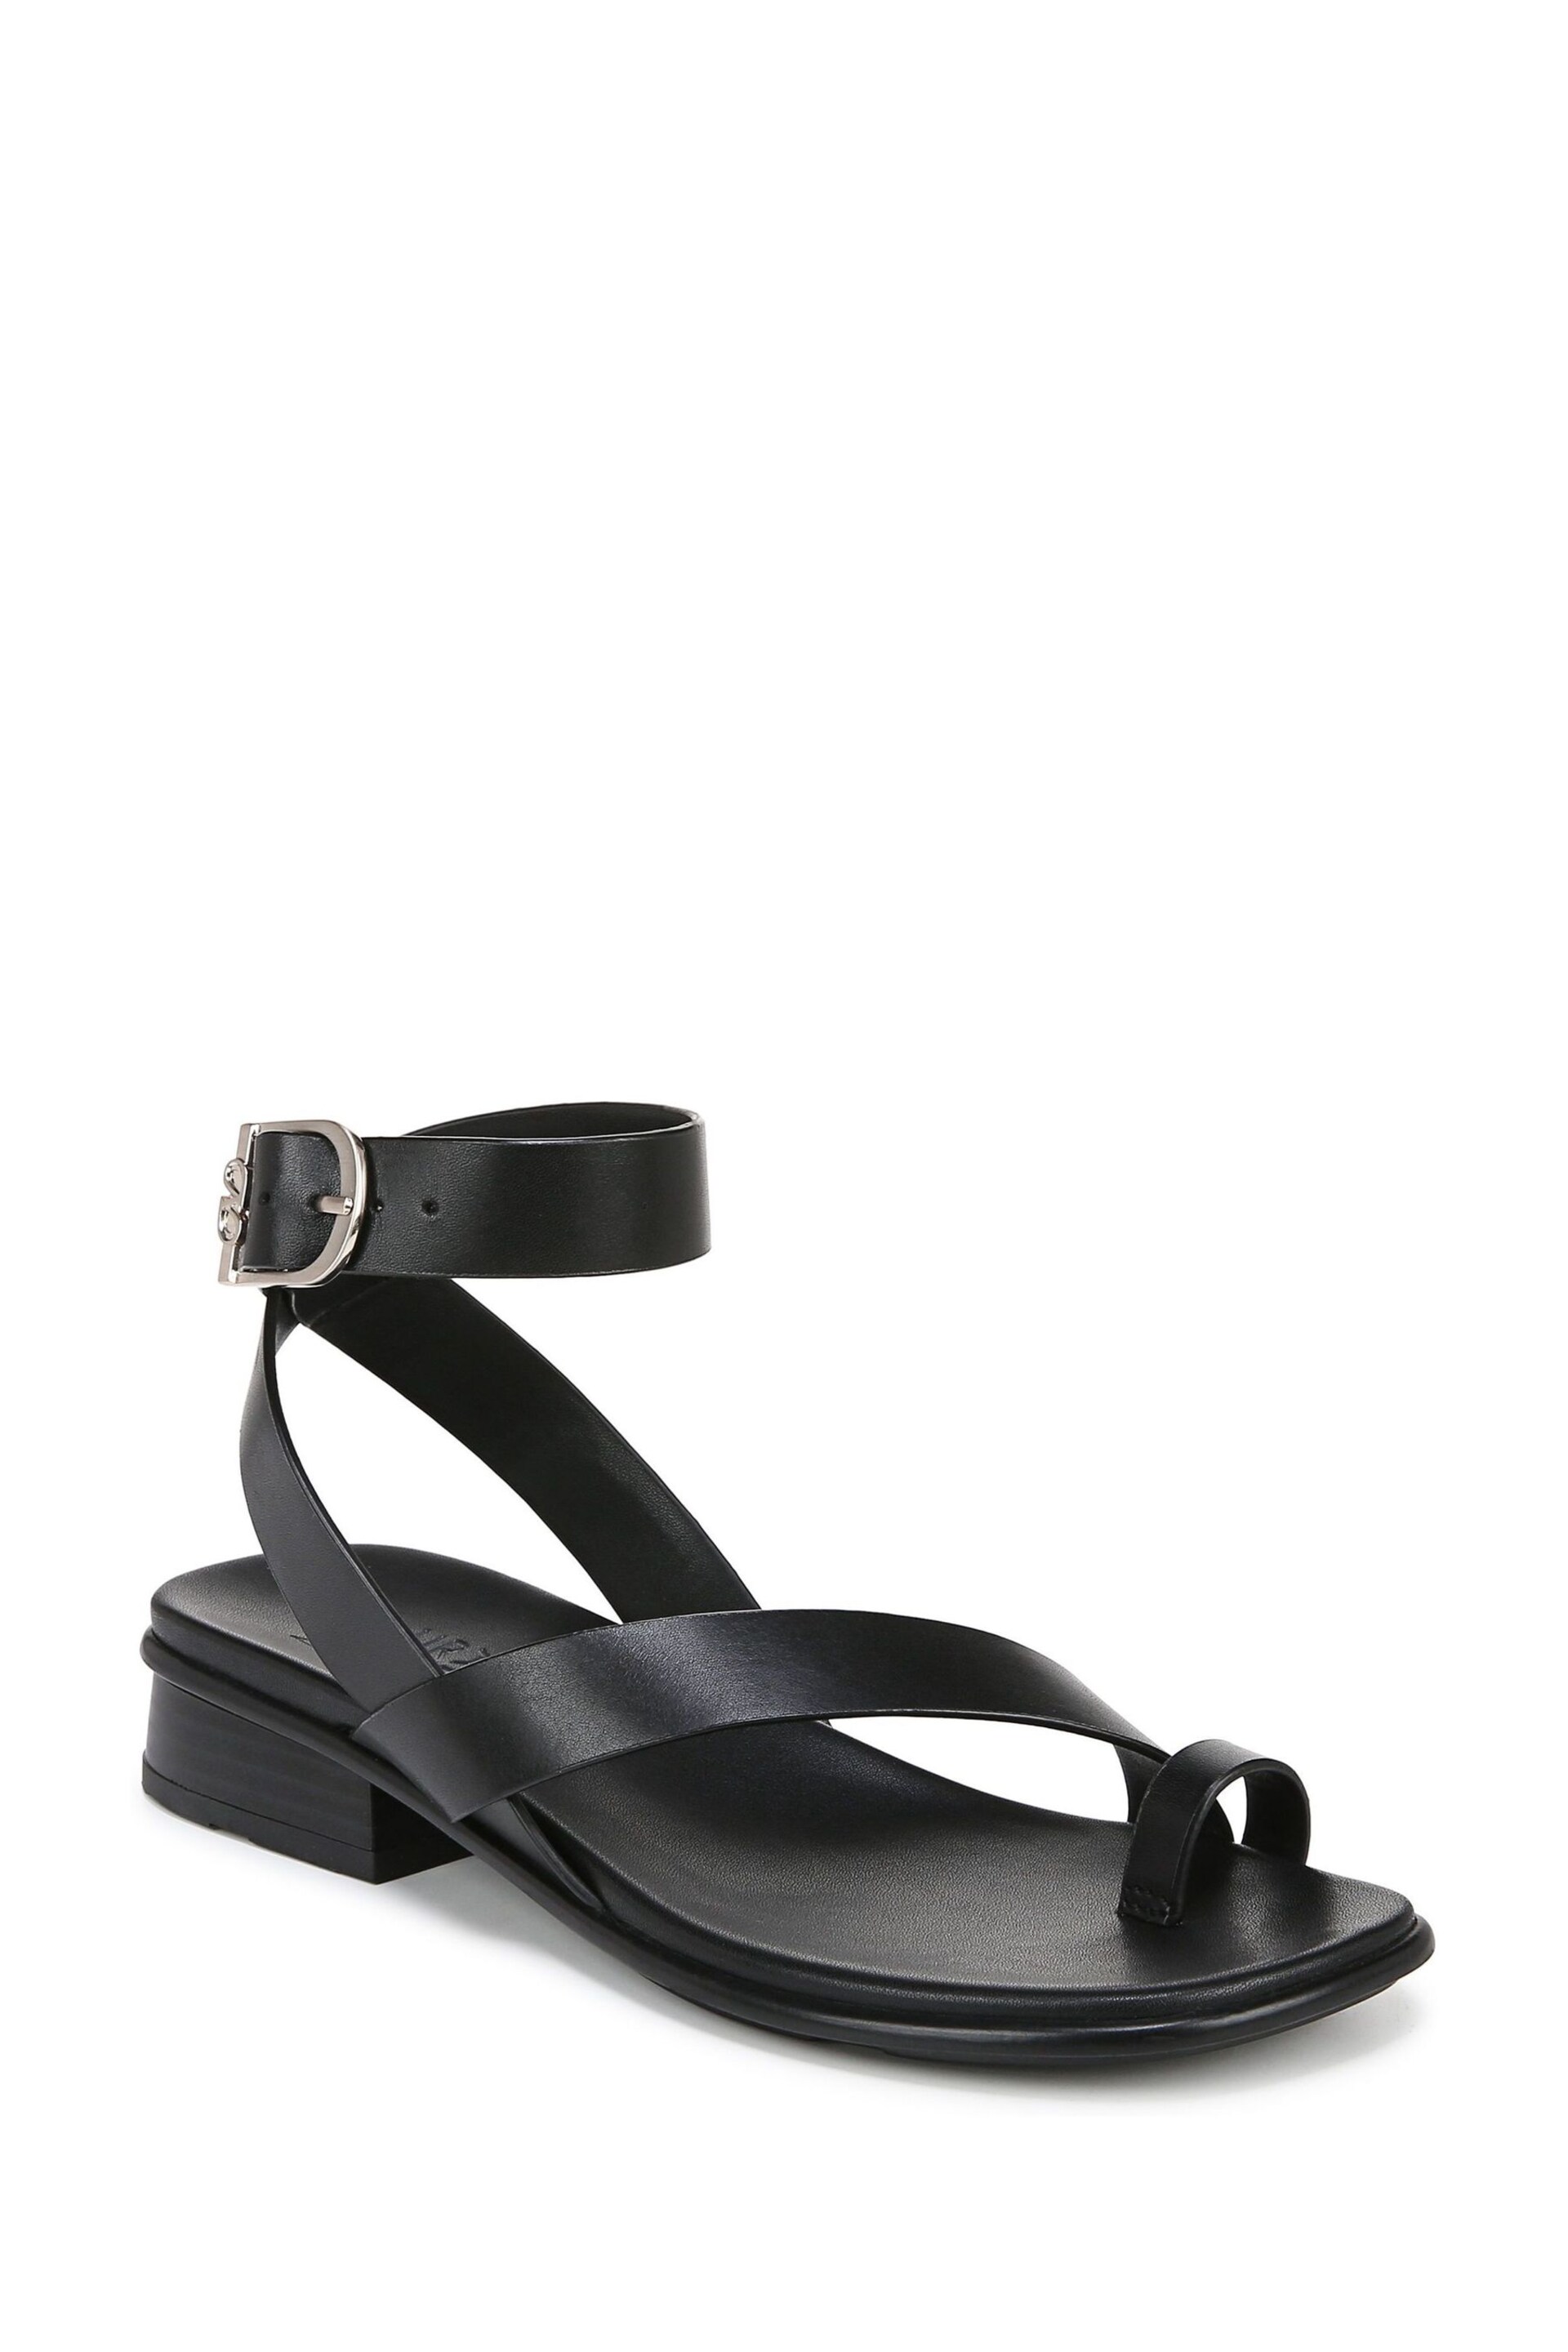 Naturalizer Birch Ankle Strap Sandals - Image 3 of 7